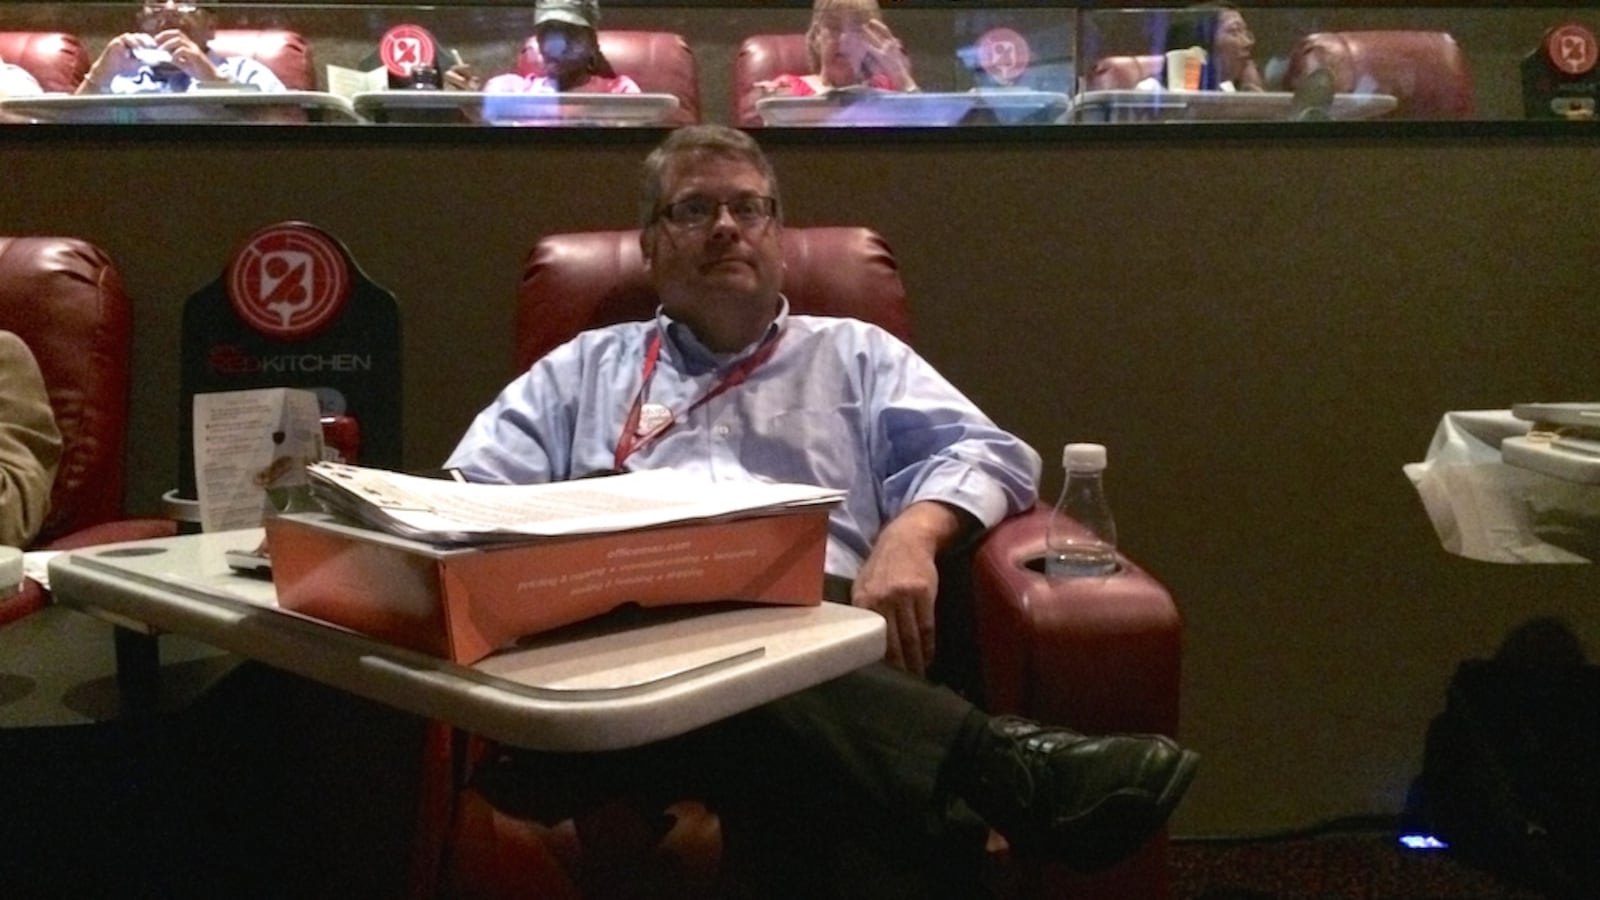 Jack Matthews, an organizer for Stop Common Core Colorado, watches Glenn Beck's "We Will Not Conform" live event via satellite at a theater in Aurora.